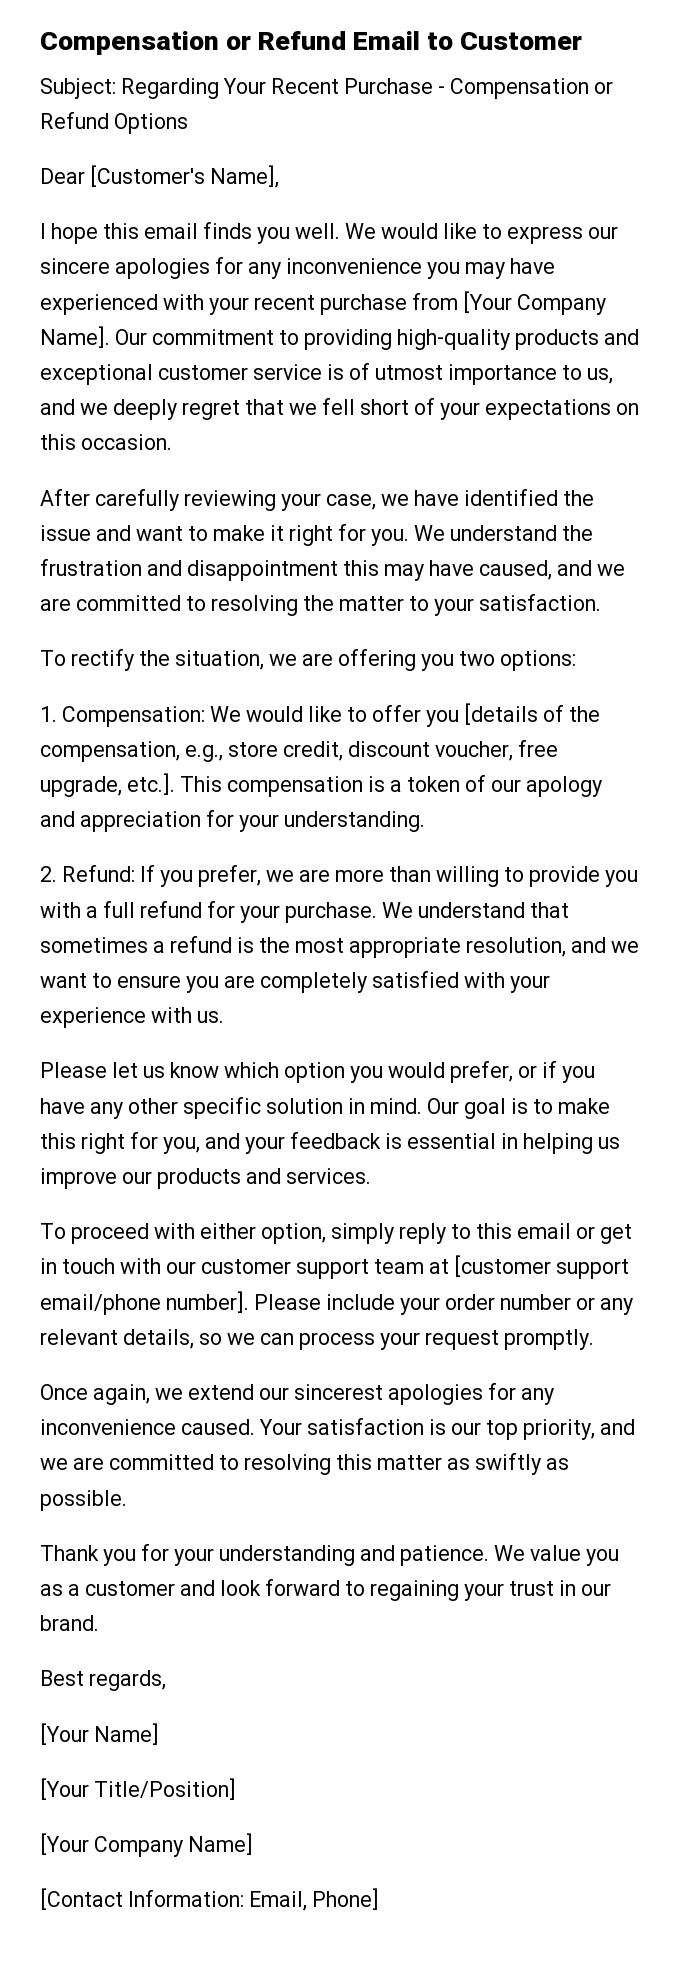 Compensation or Refund Email to Customer